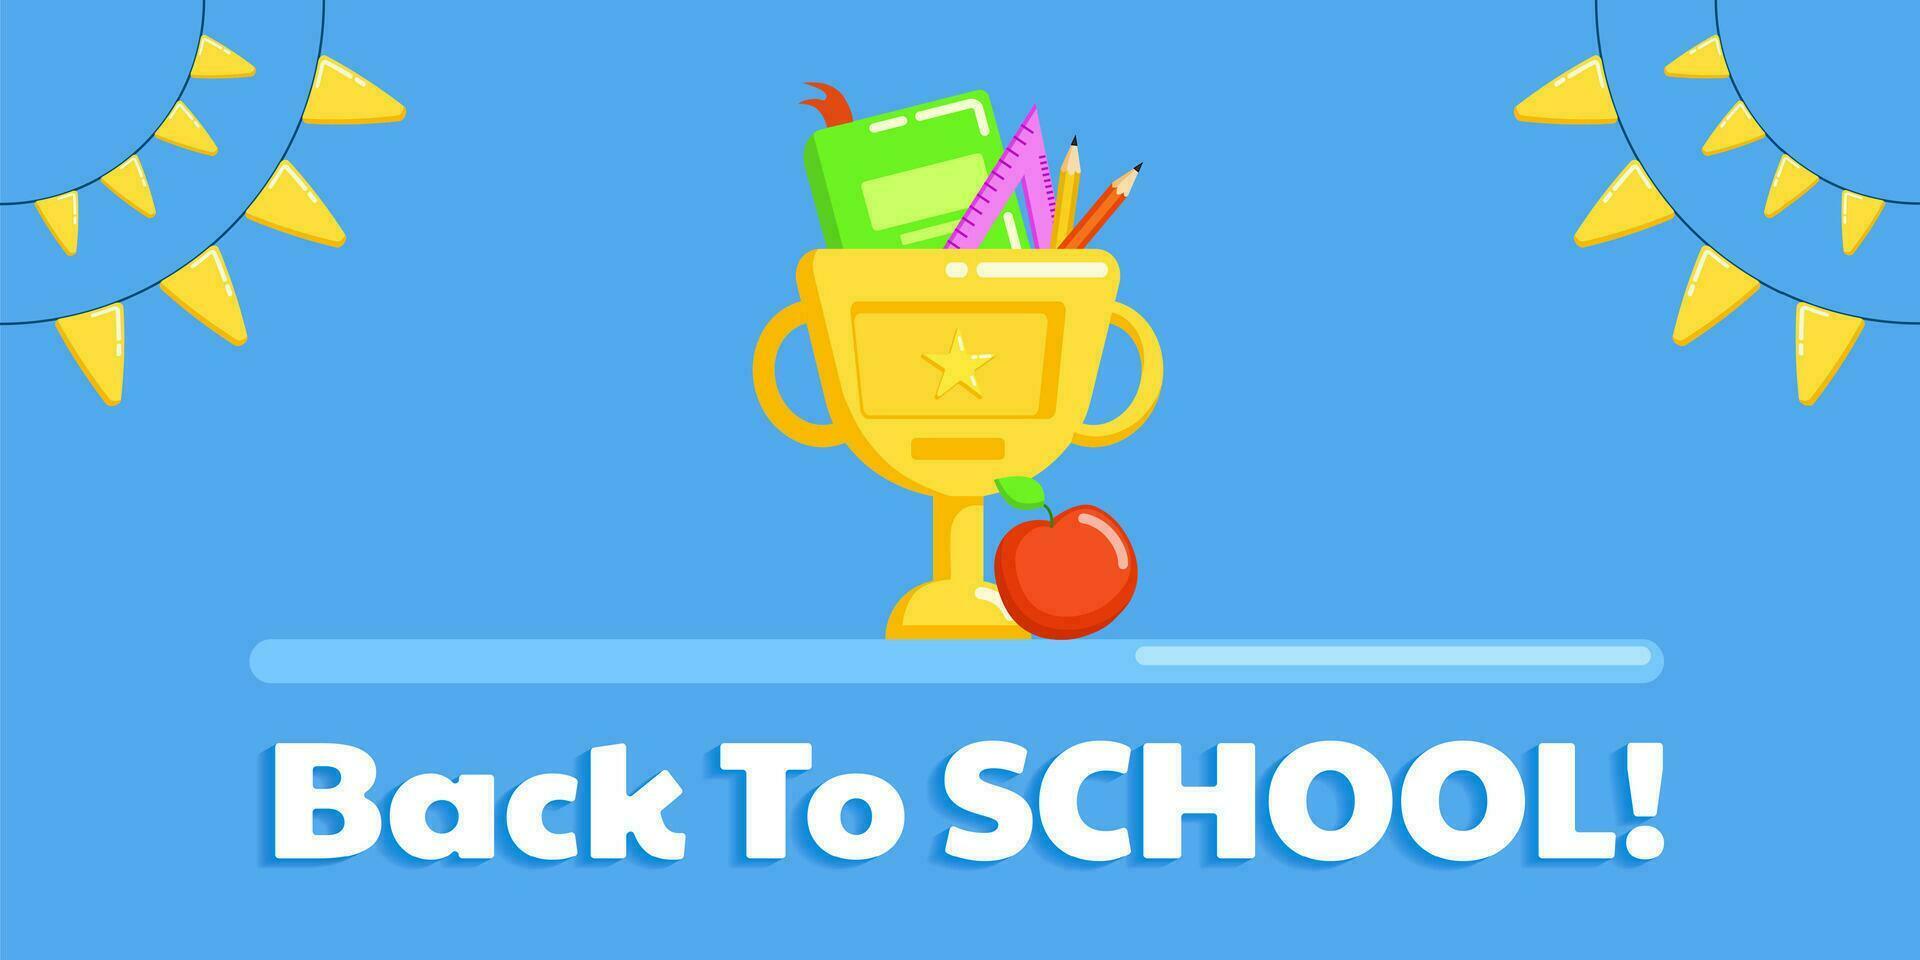 Back to School banner with school supplies inside the golden cup and  flags around. Vector back to School illustration.